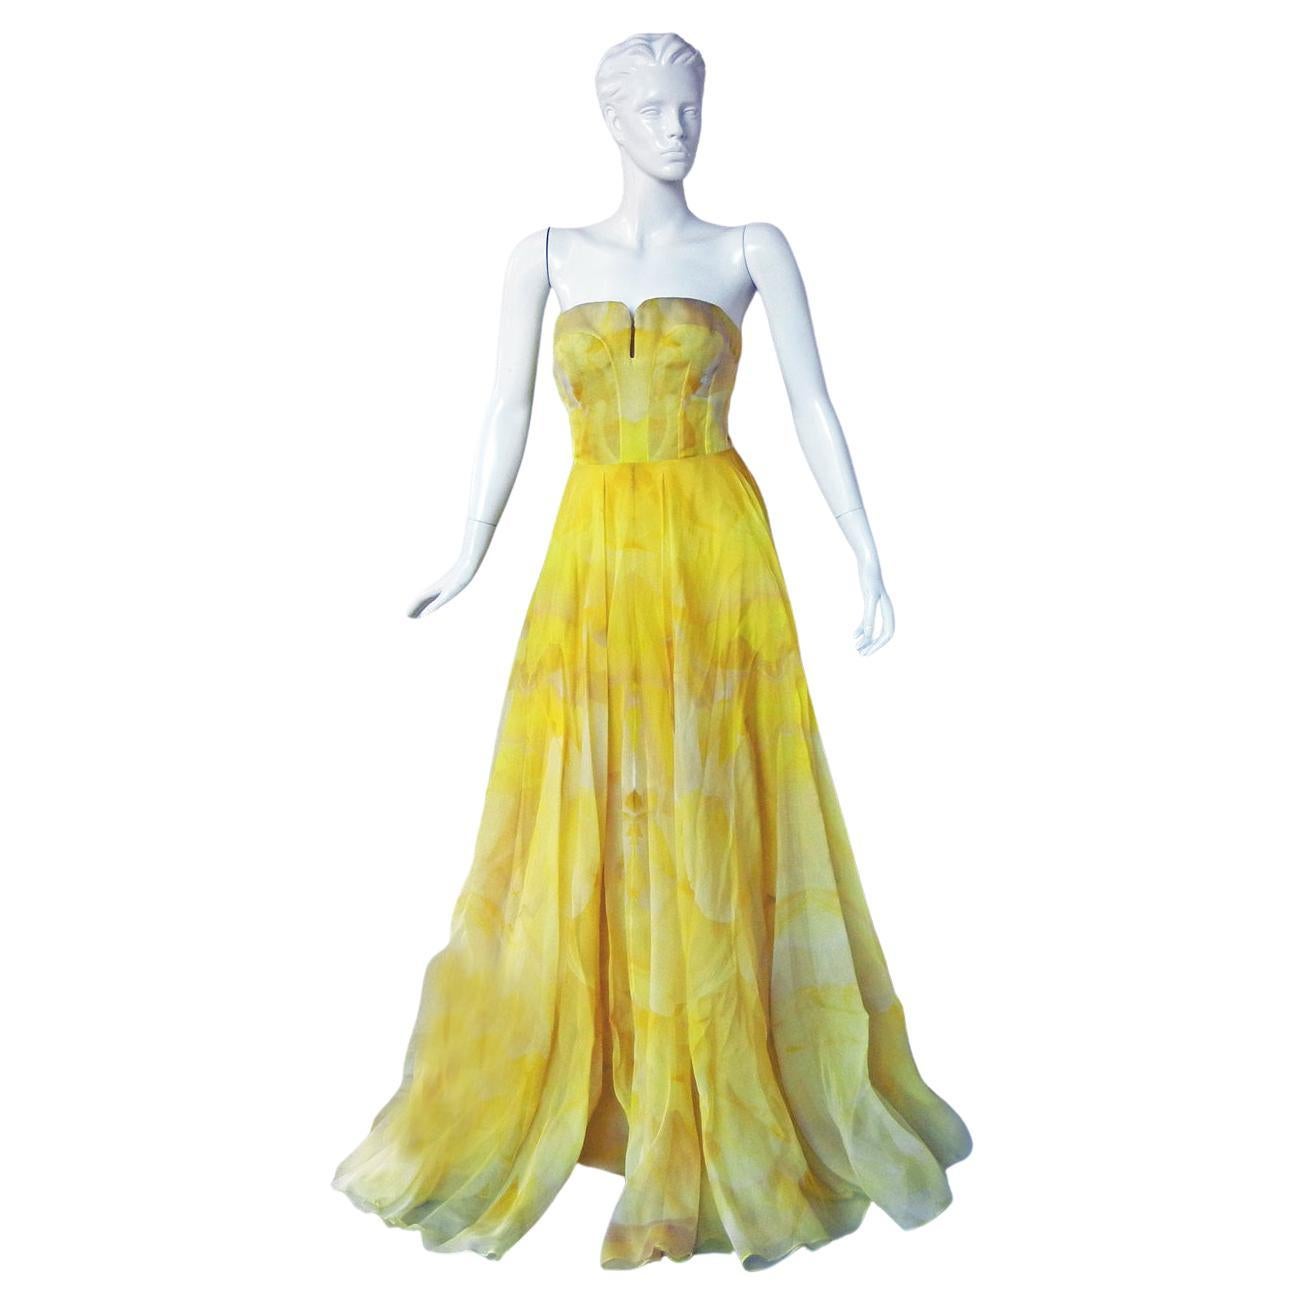 Alexander McQueen Stunning Poppy Print Daffodil Gown NWT For Sale